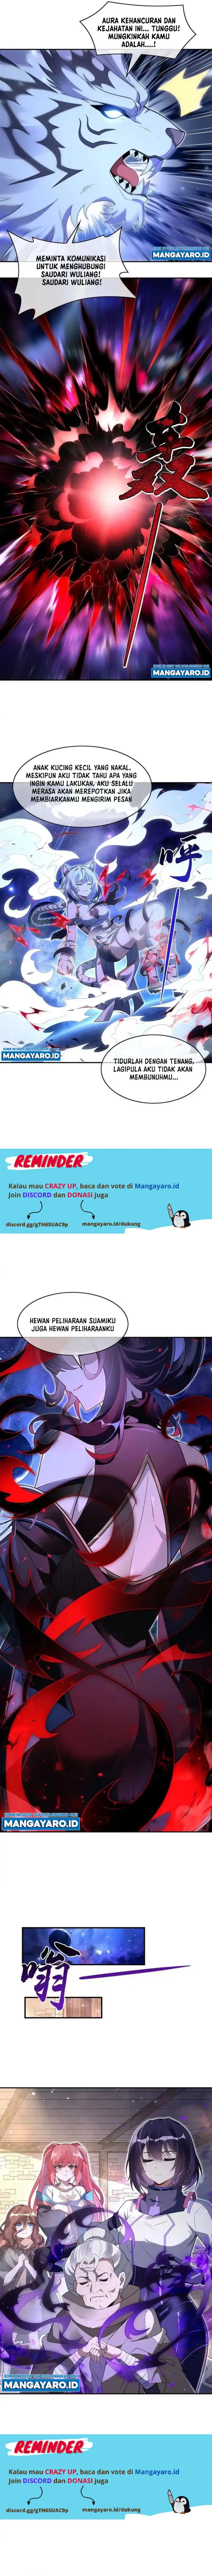 Dilarang COPAS - situs resmi www.mangacanblog.com - Komik my female apprentices are all big shots from the future 277 - chapter 277 278 Indonesia my female apprentices are all big shots from the future 277 - chapter 277 Terbaru 7|Baca Manga Komik Indonesia|Mangacan